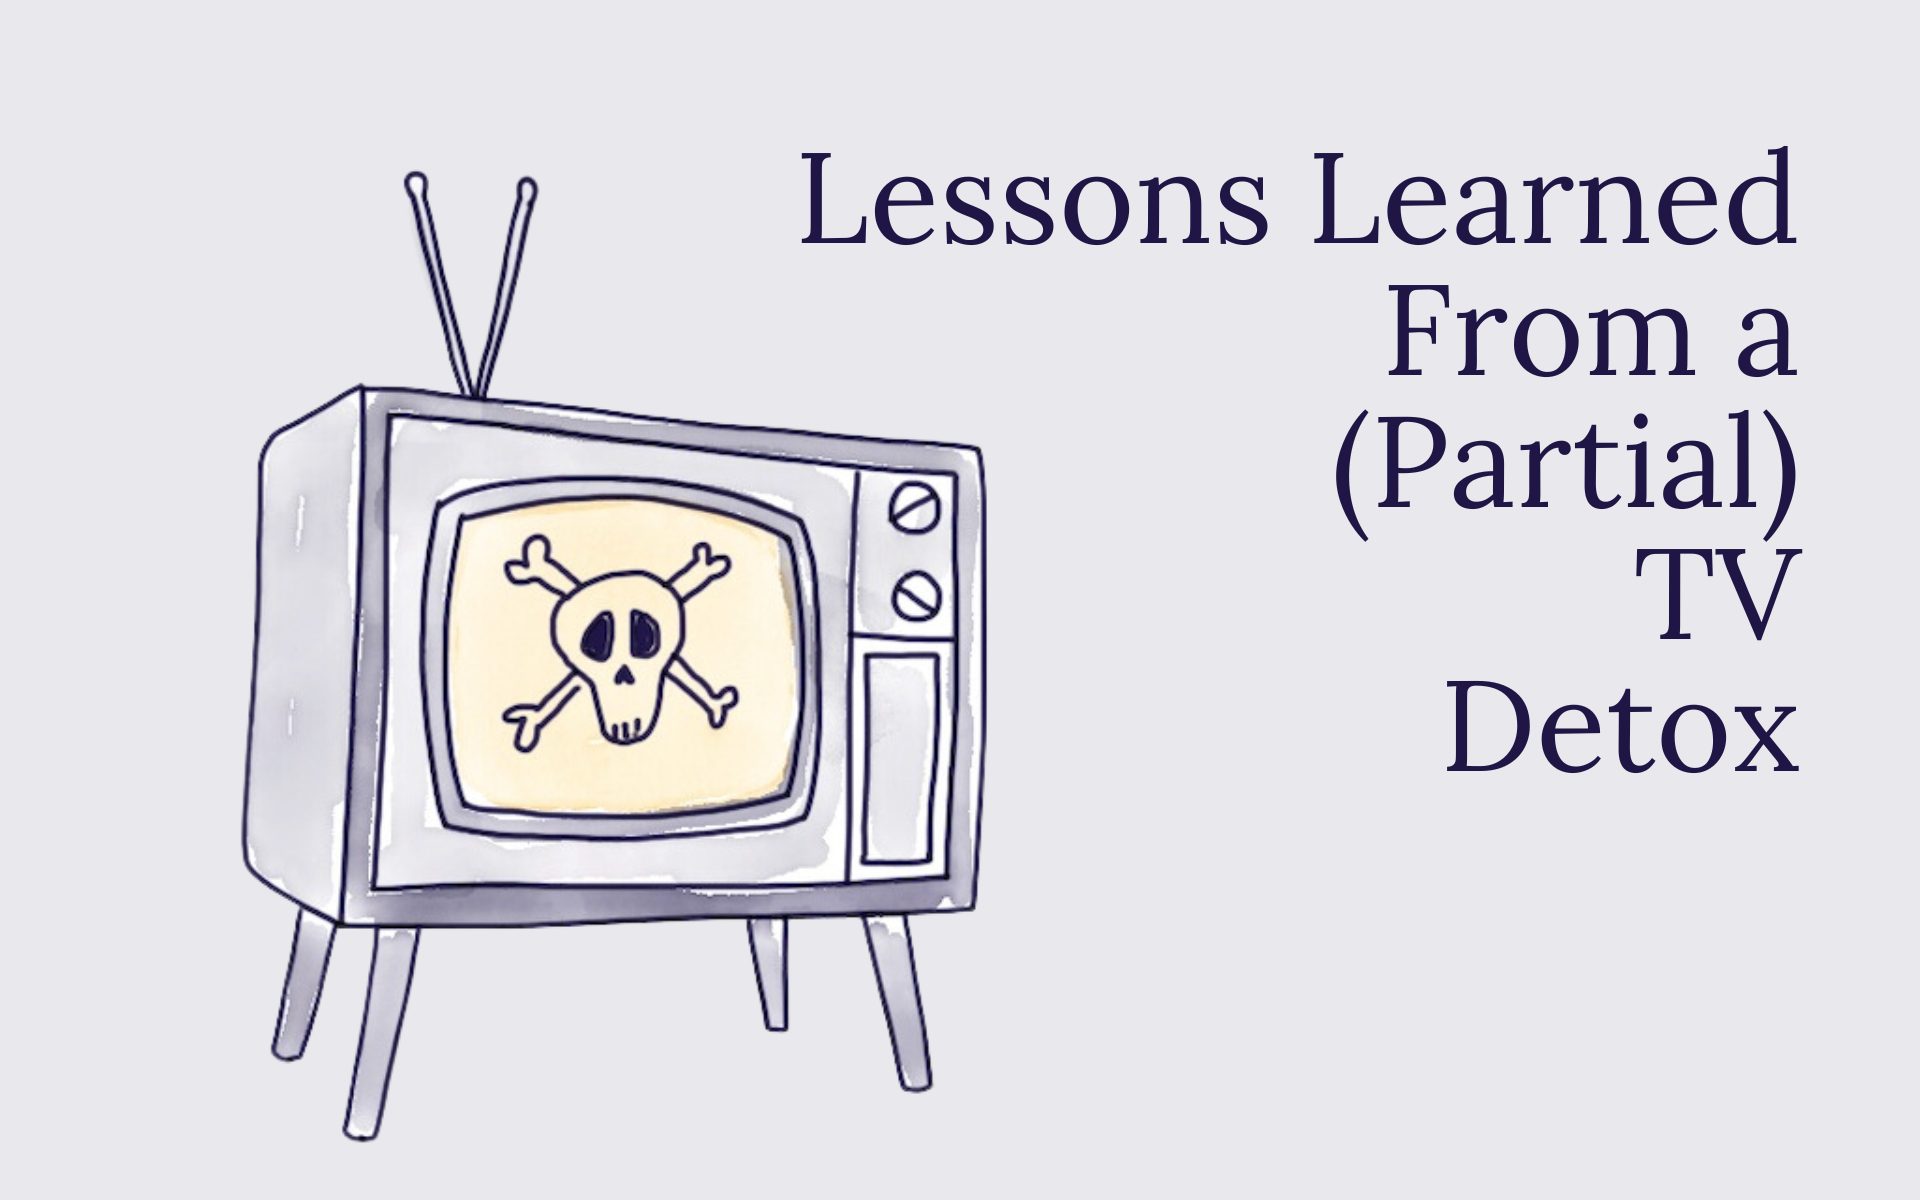 Lessons Learned From a (Partial) TV Detox